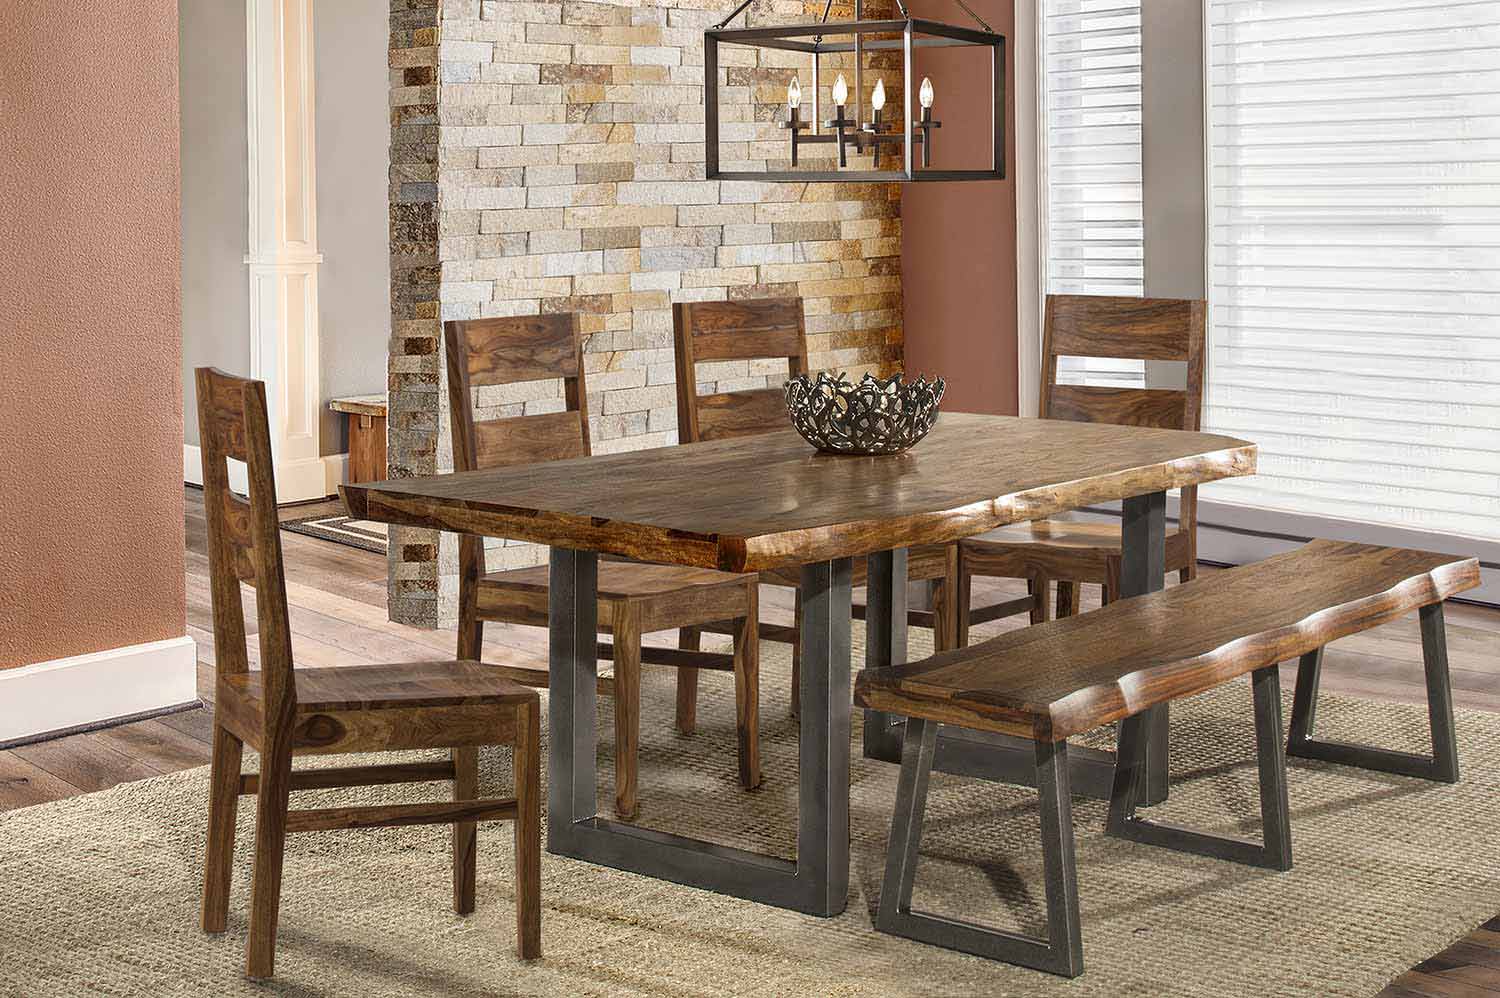 Hillsdale Emerson 6-Piece Rectangle Dining Set with Bench - Natural Sheesham